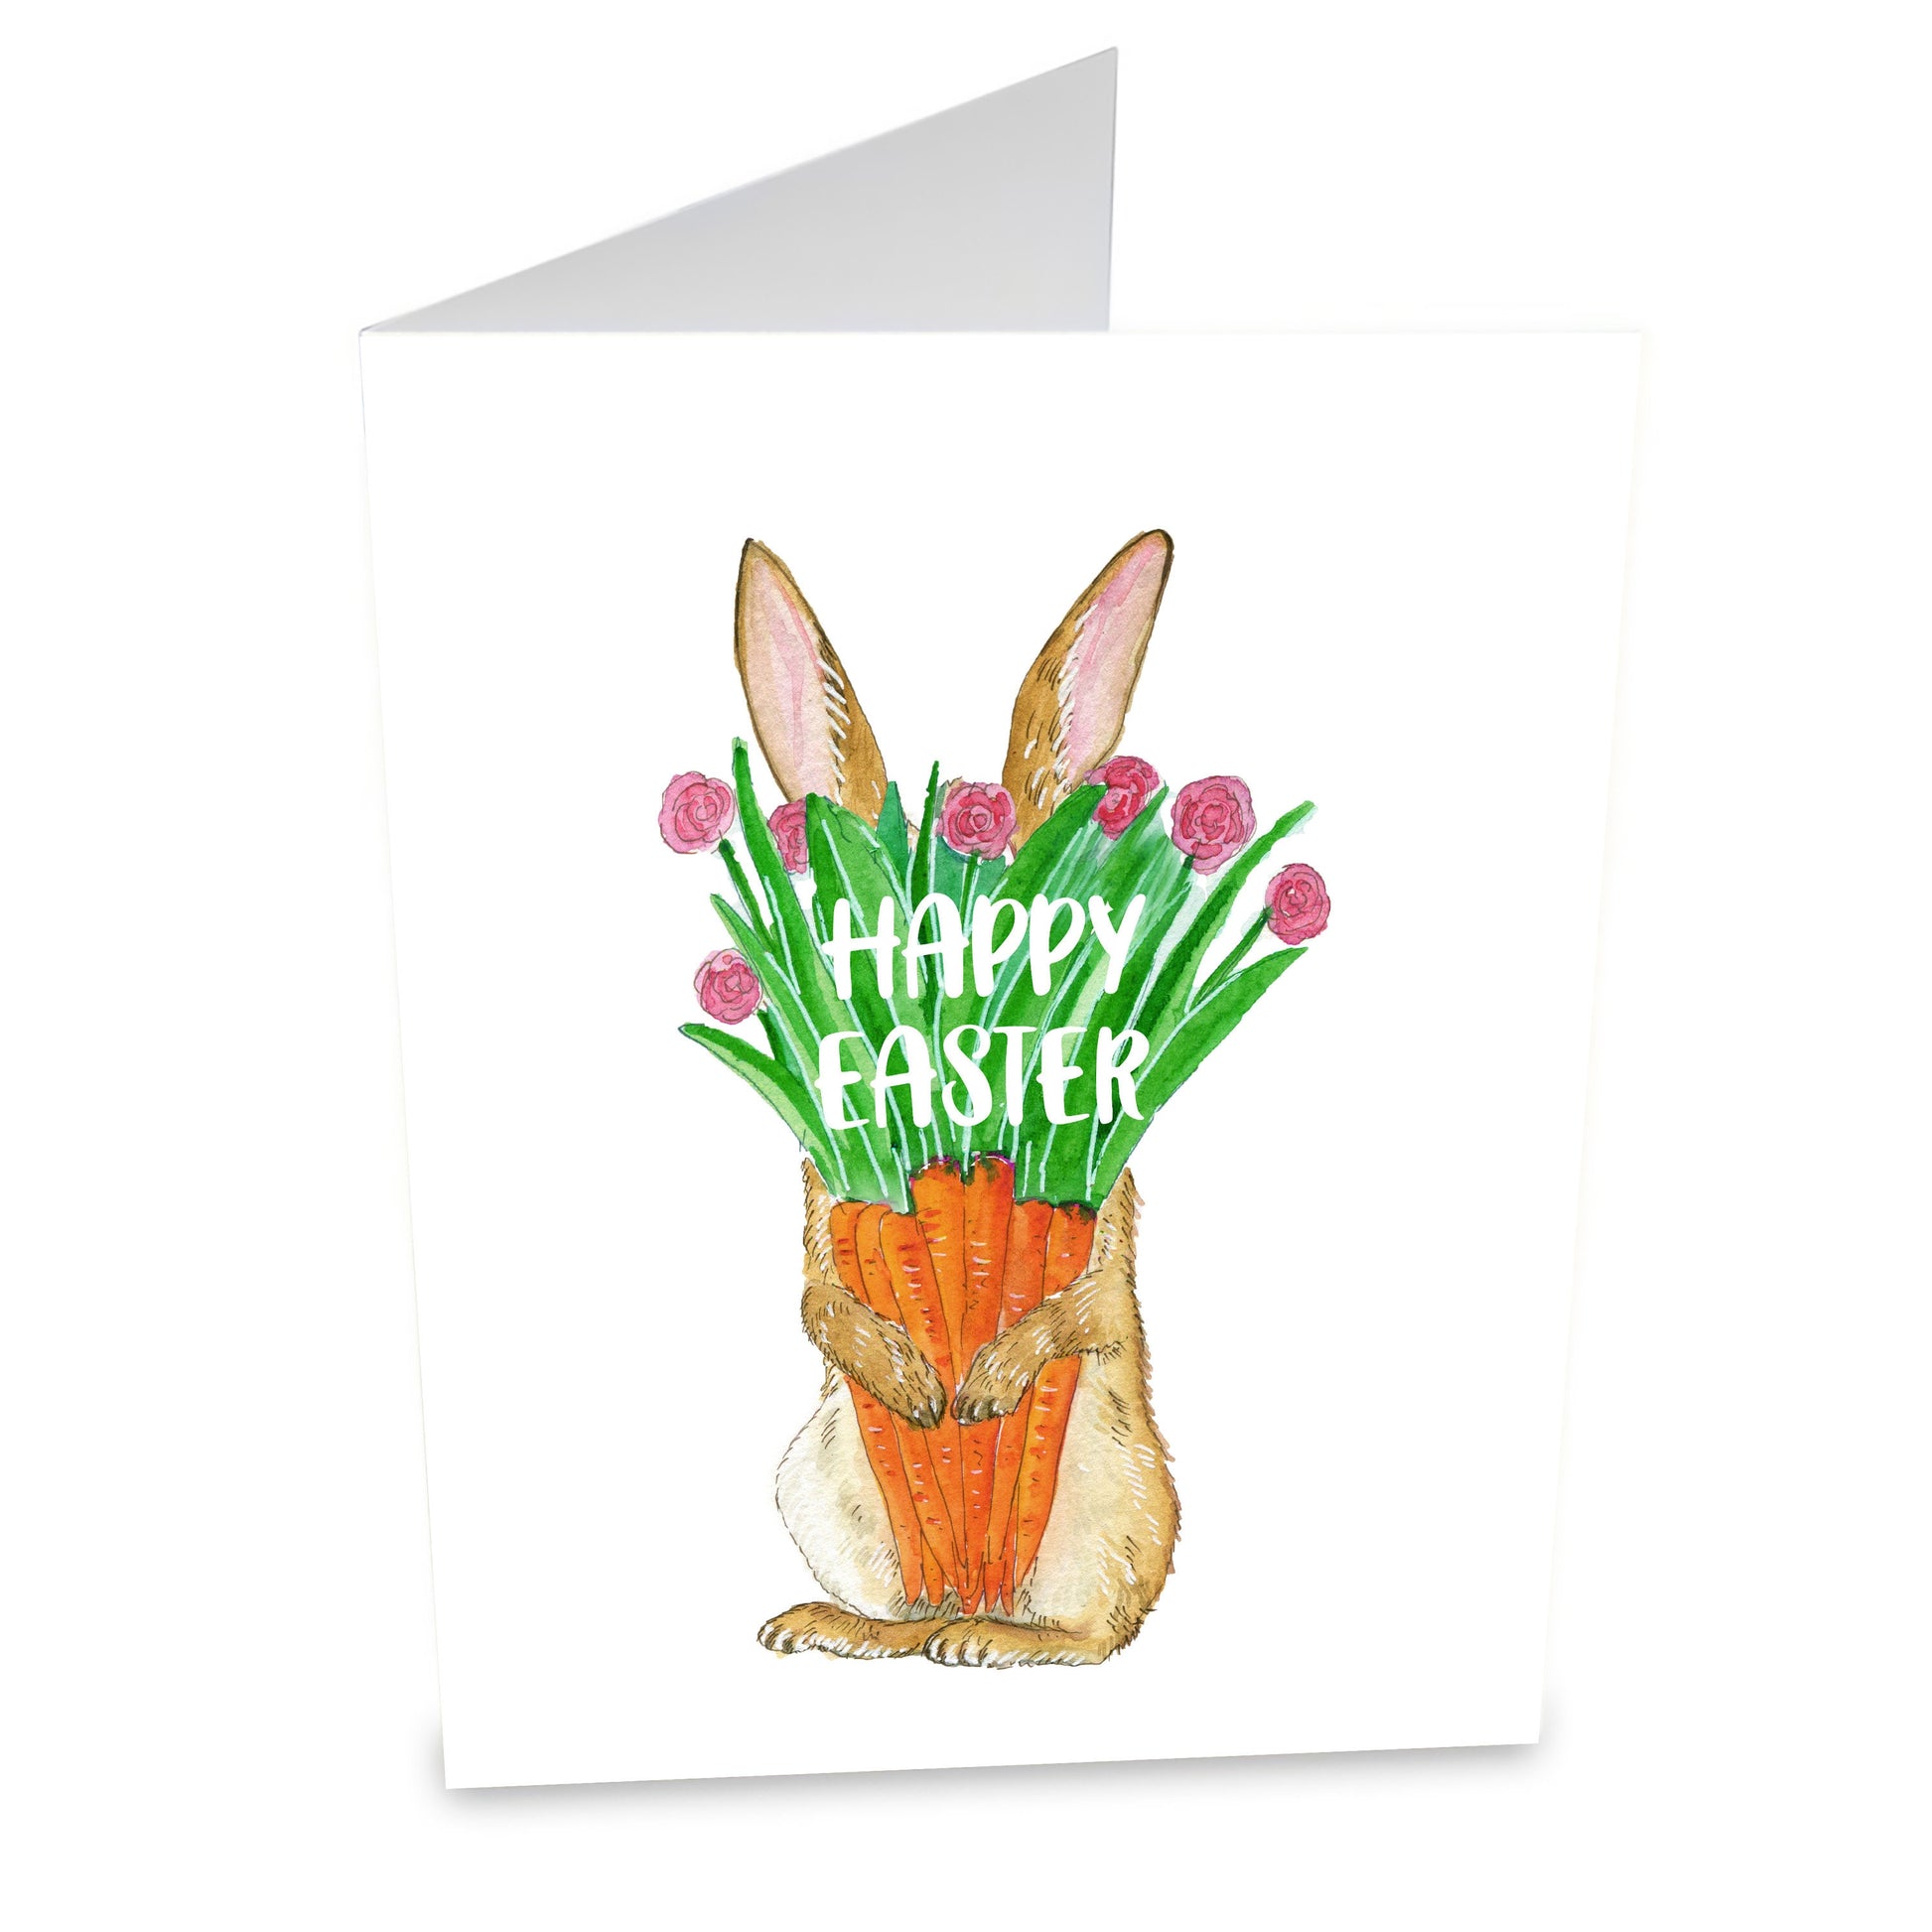 Carrot Flower Bunny Easter Card Pack - Funny Easter Cards For Kids - Watercolor Spring Greeting Card Set For Friends